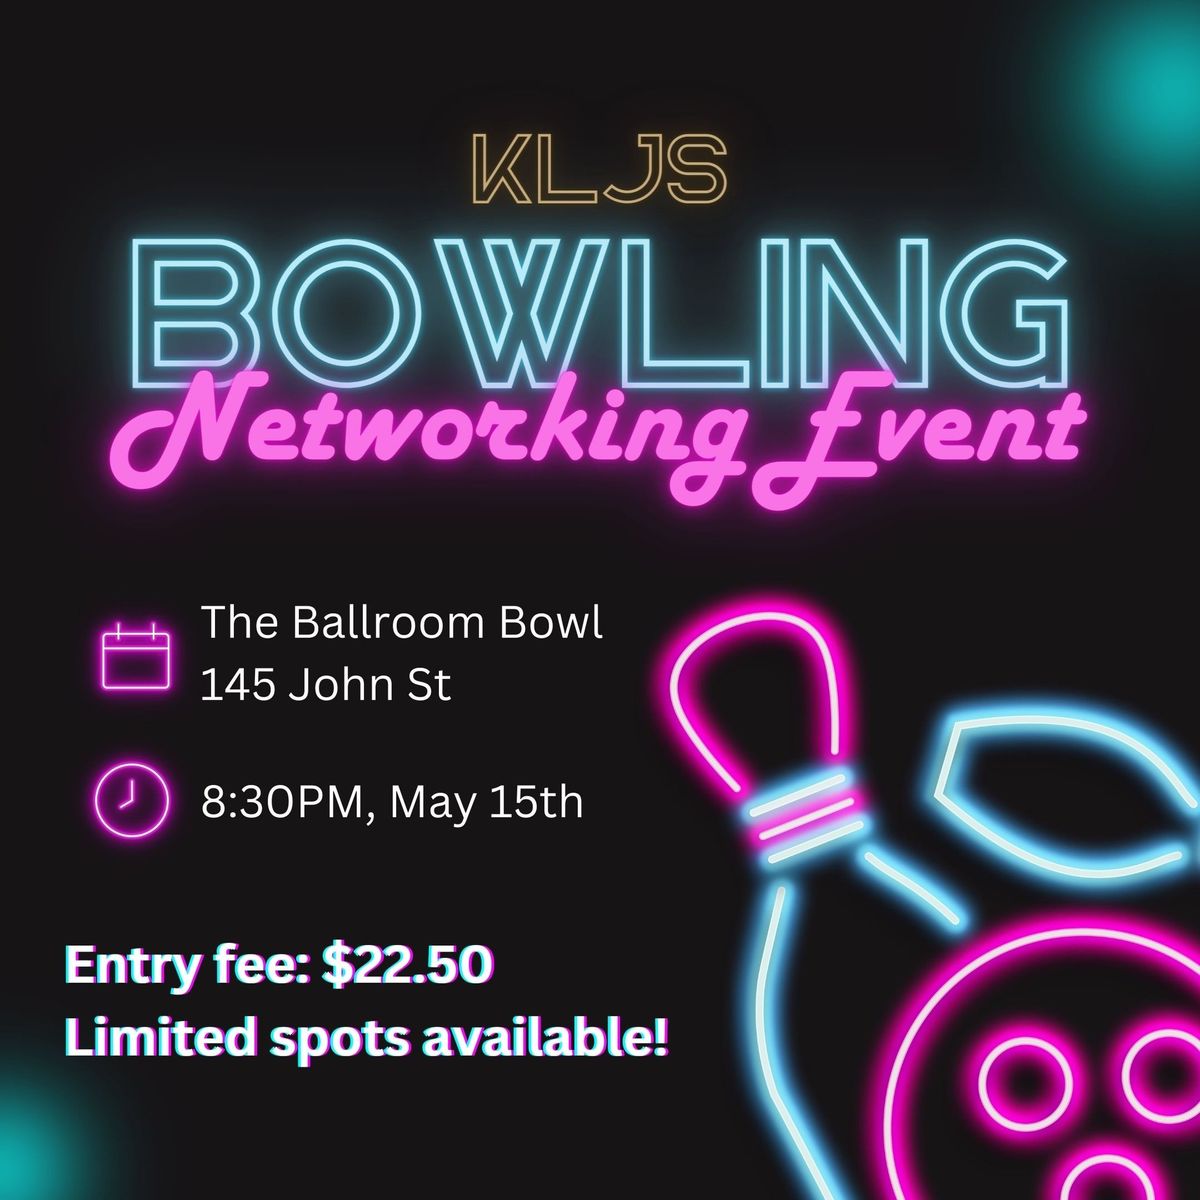 Bowling Networking Event